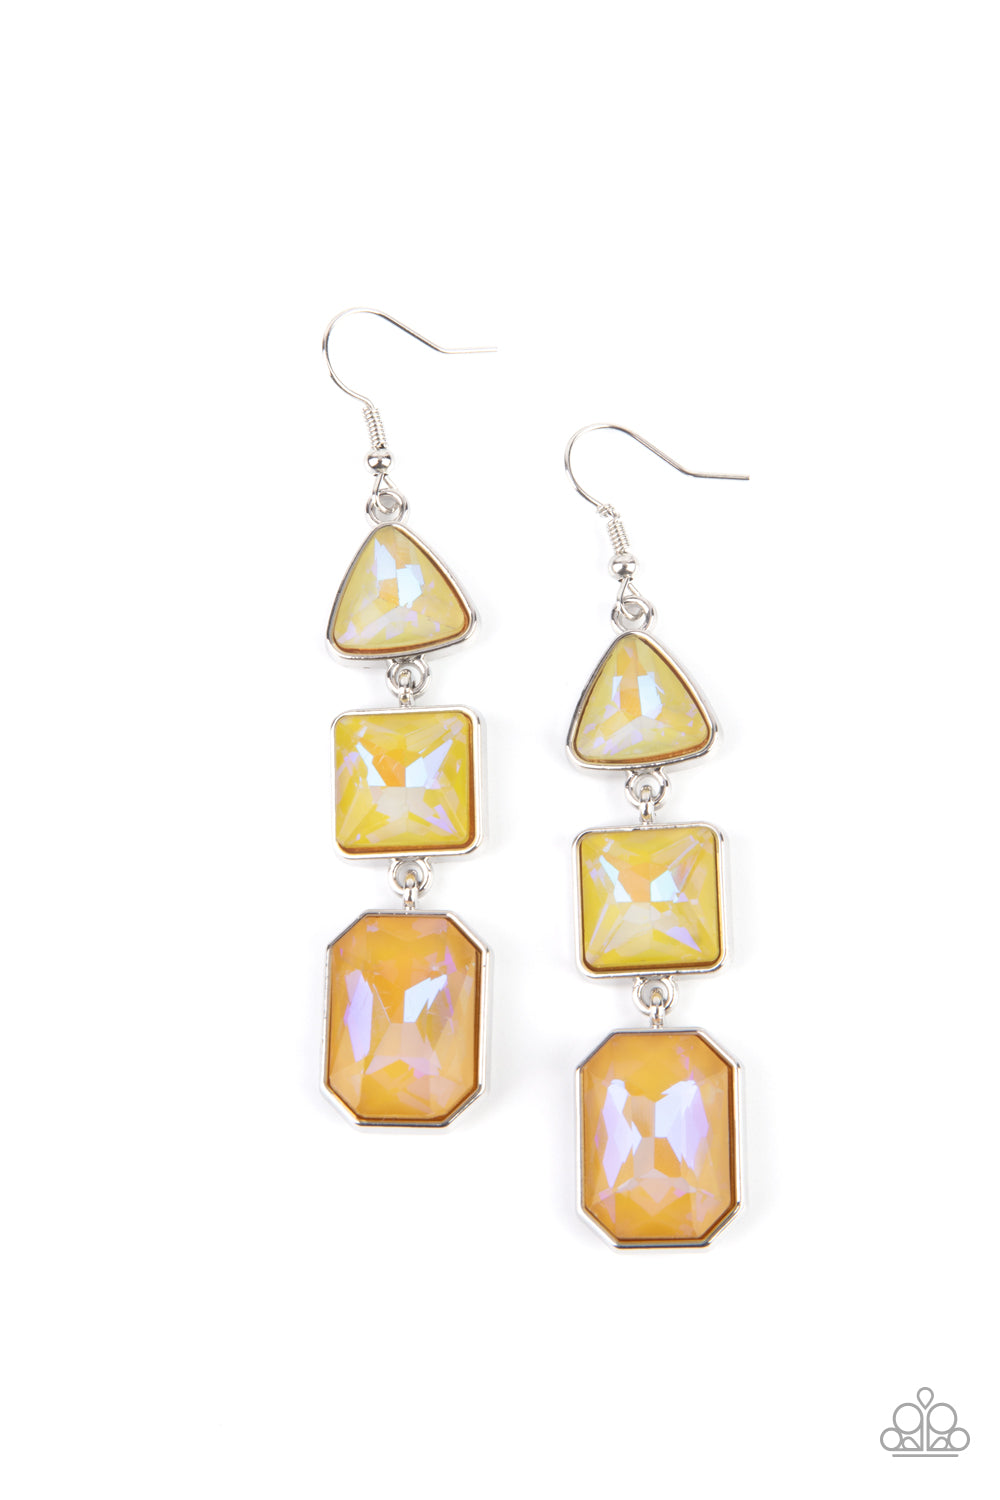 Cosmic Culture Yellow Earring - Paparazzi Accessories  Featuring a yellow UV shimmer, a trio of geometrically shaped gems pressed into silver frames link together culminating in a cosmically stellar lure. Earring attaches to a standard fishhook fitting.  Sold as one pair of earrings.